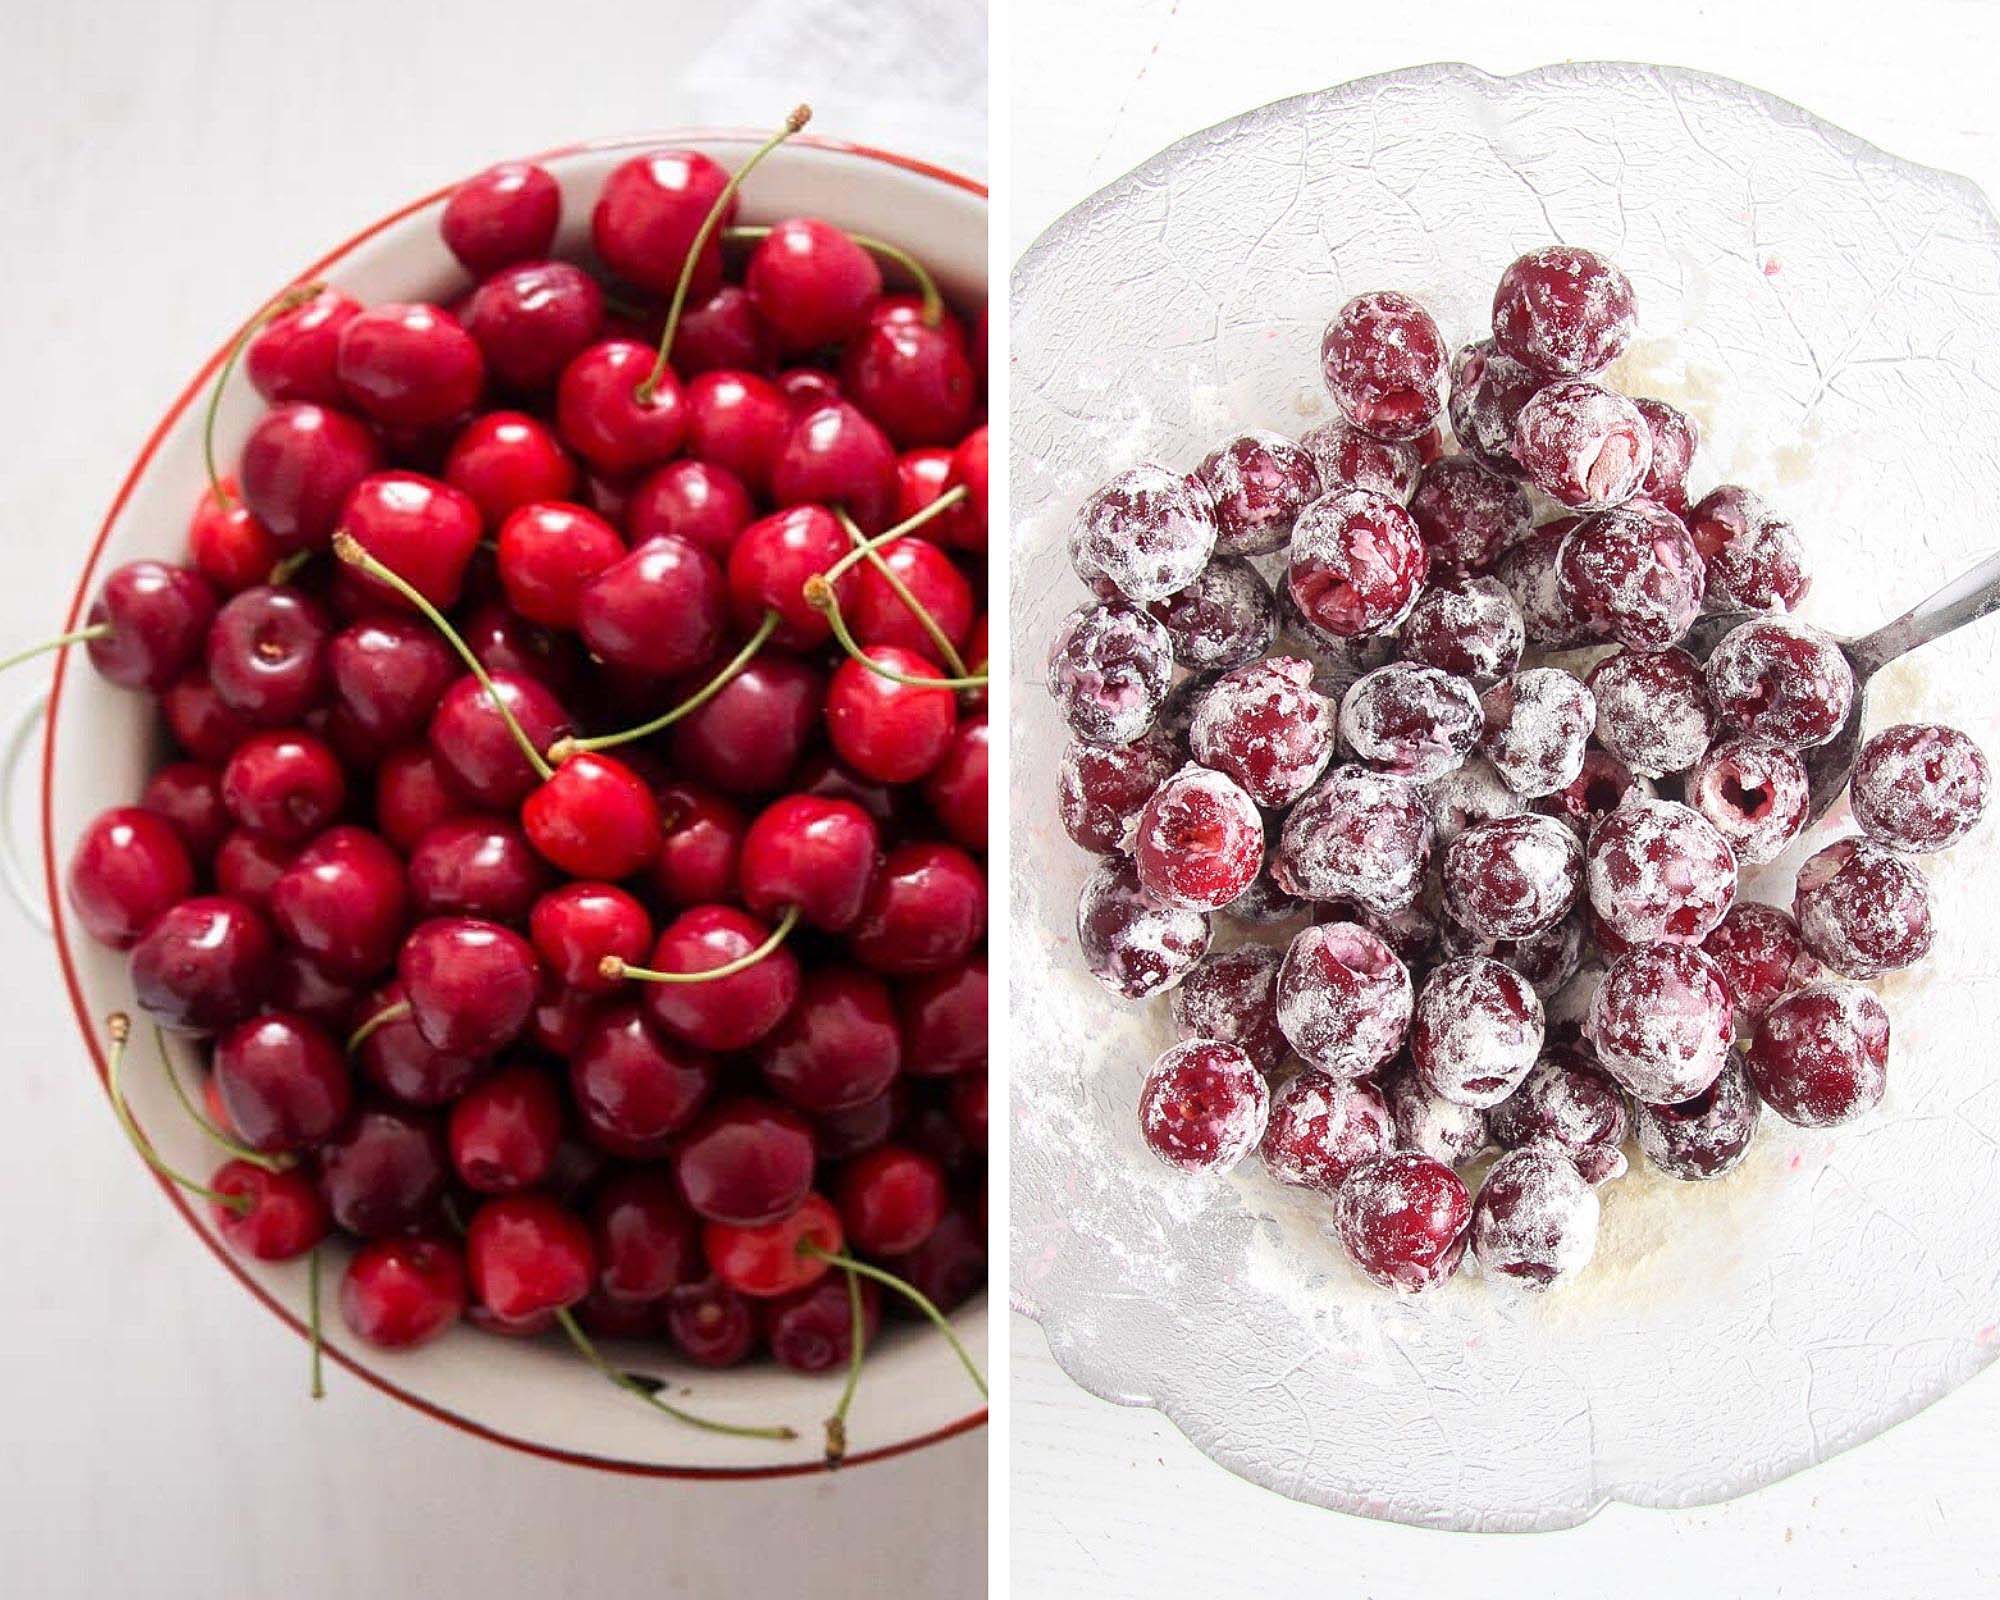 fresh cherries in a bowl and coated with flour in another bowl